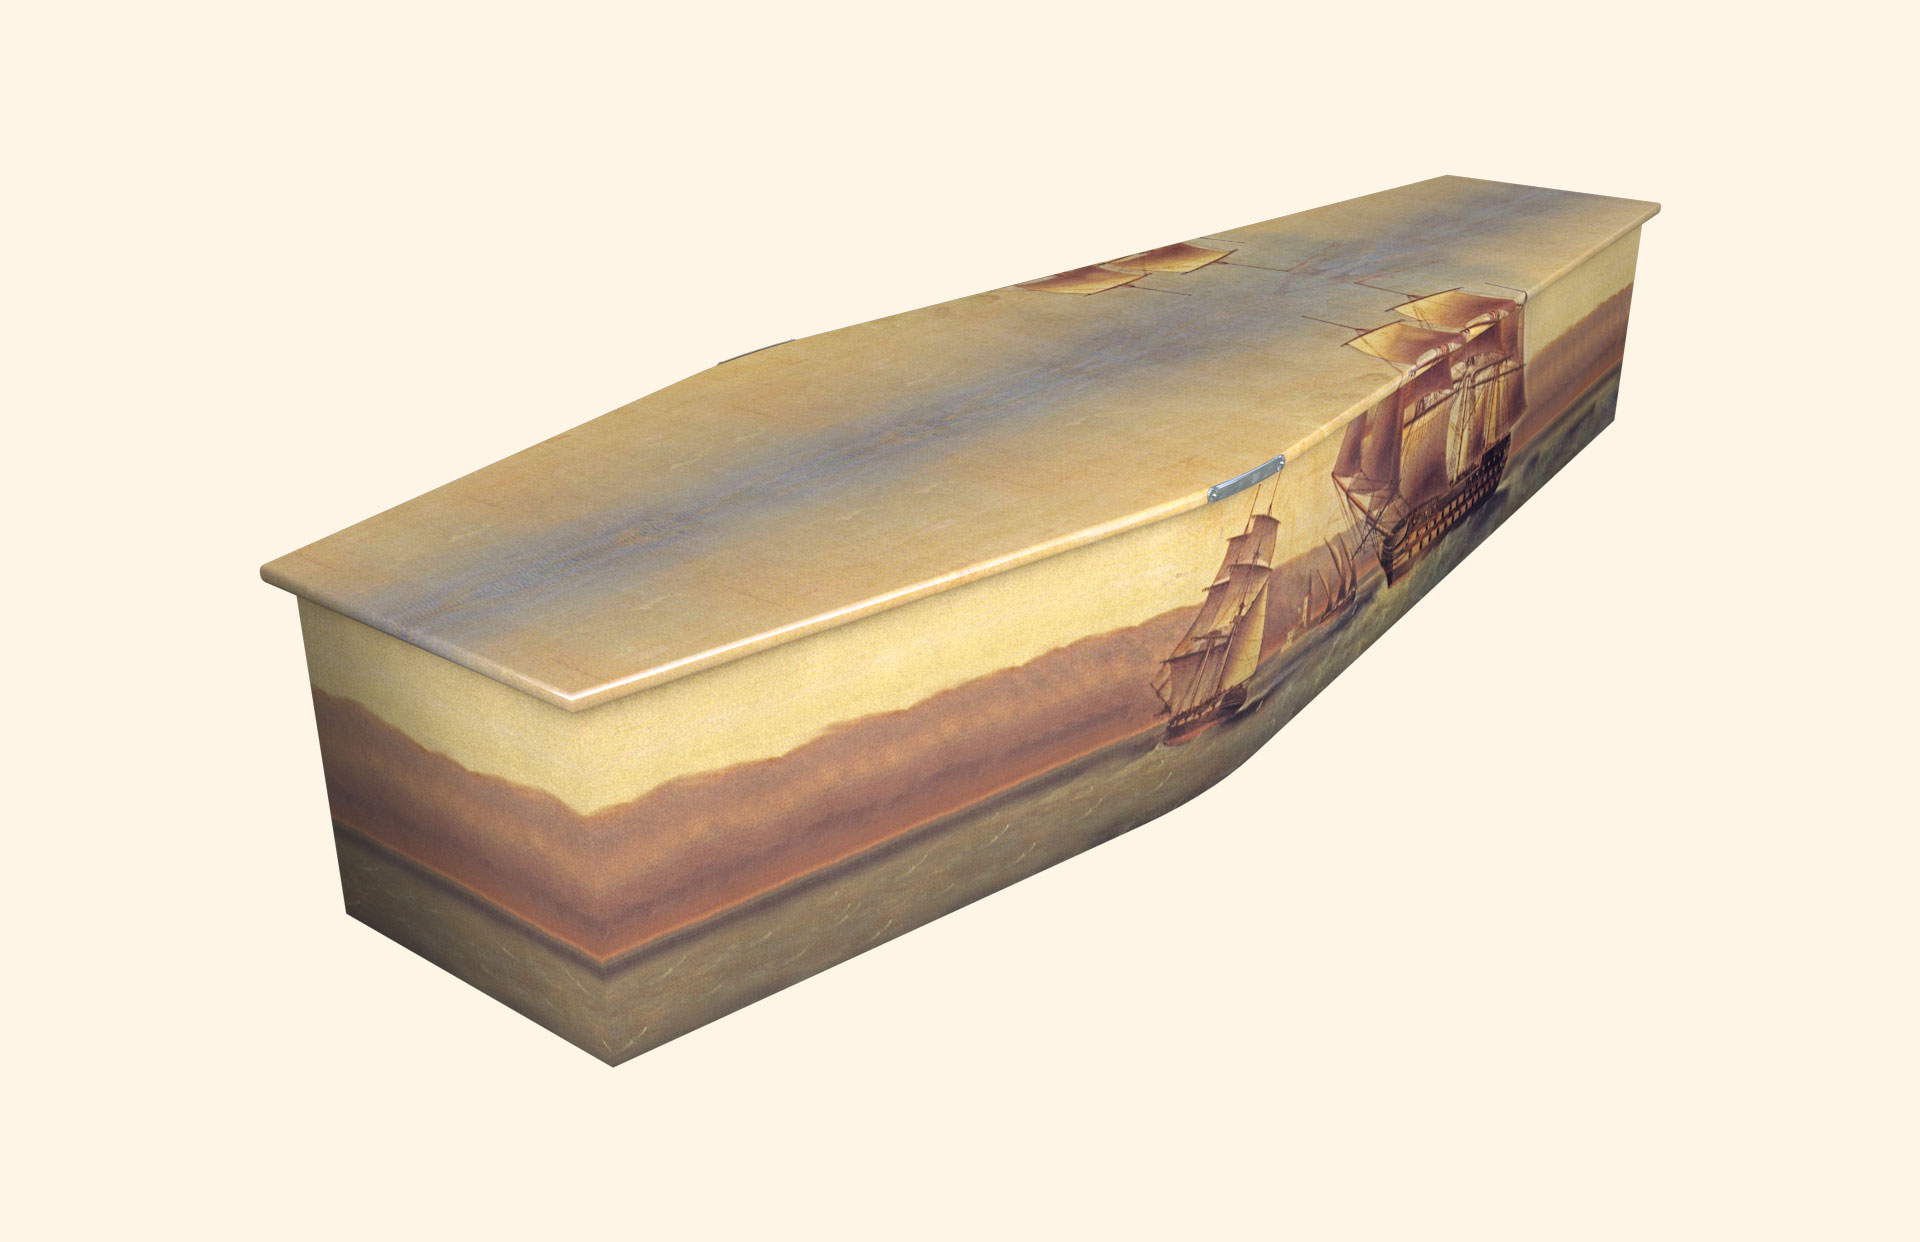 Sailing Ship design on a traditional coffin